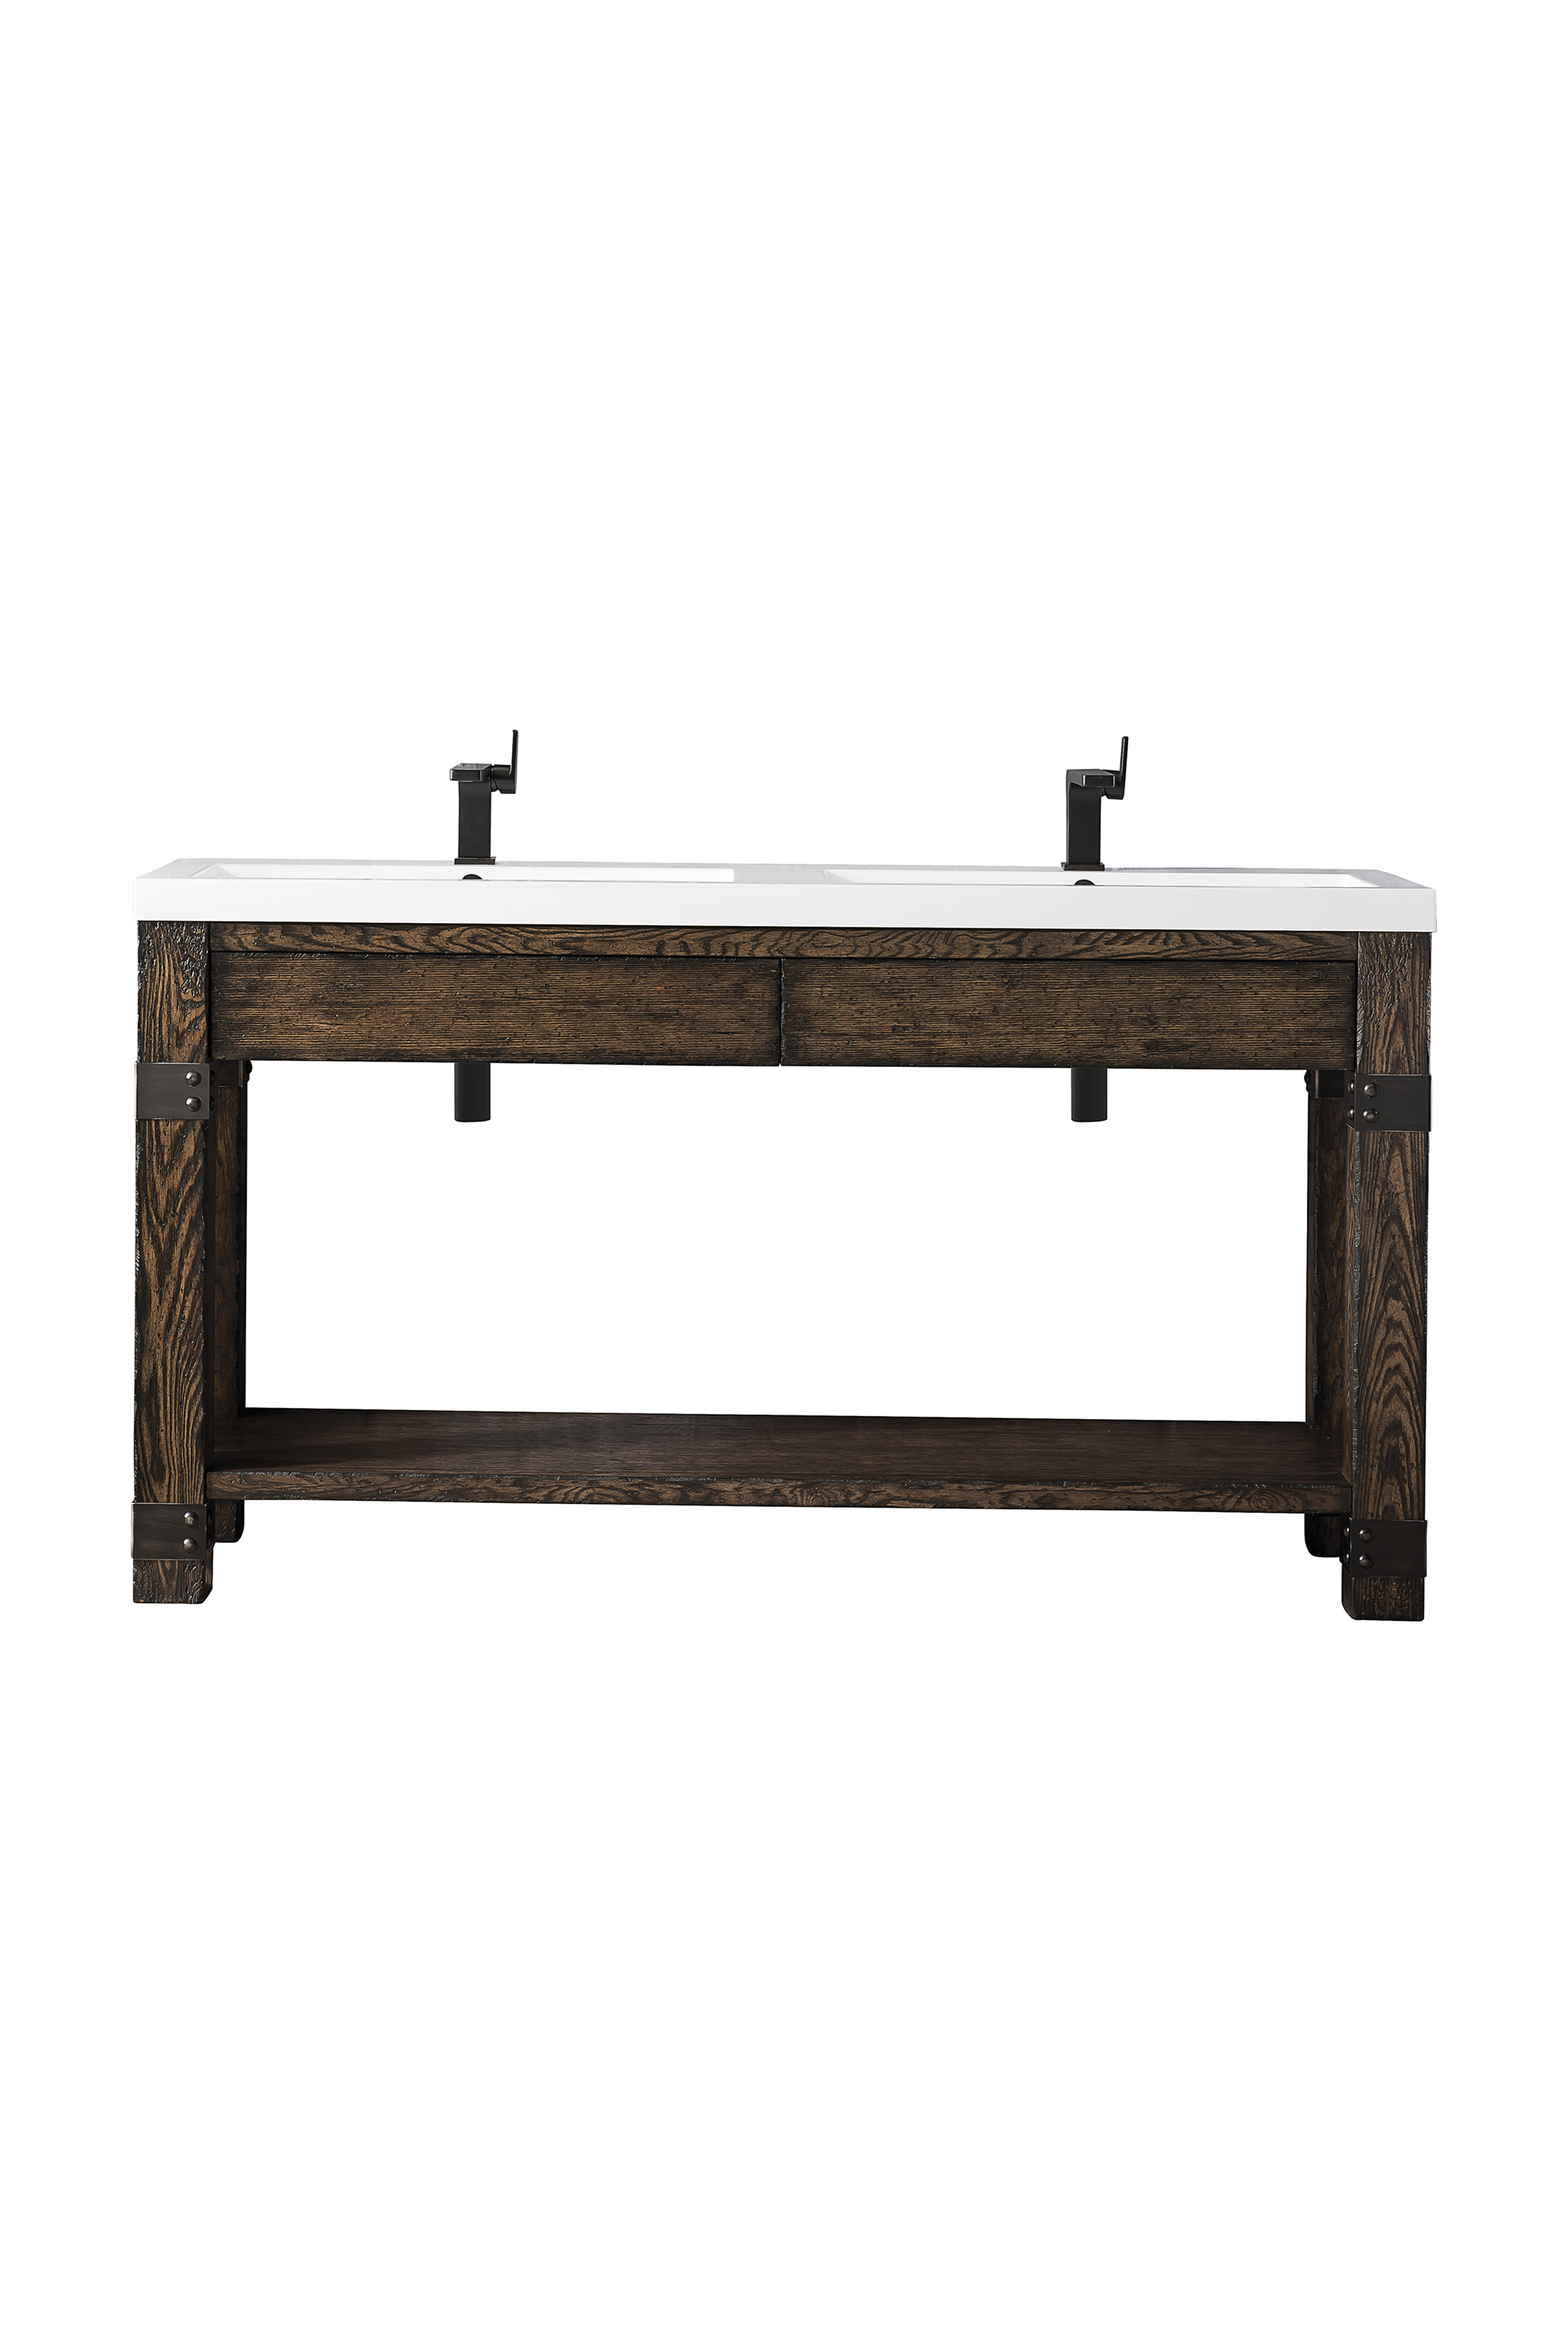 James Martin C205V63RSAWG Brooklyn 63" Wooden Sink Console, Rustic Ash w/ White Glossy Composite Countertop